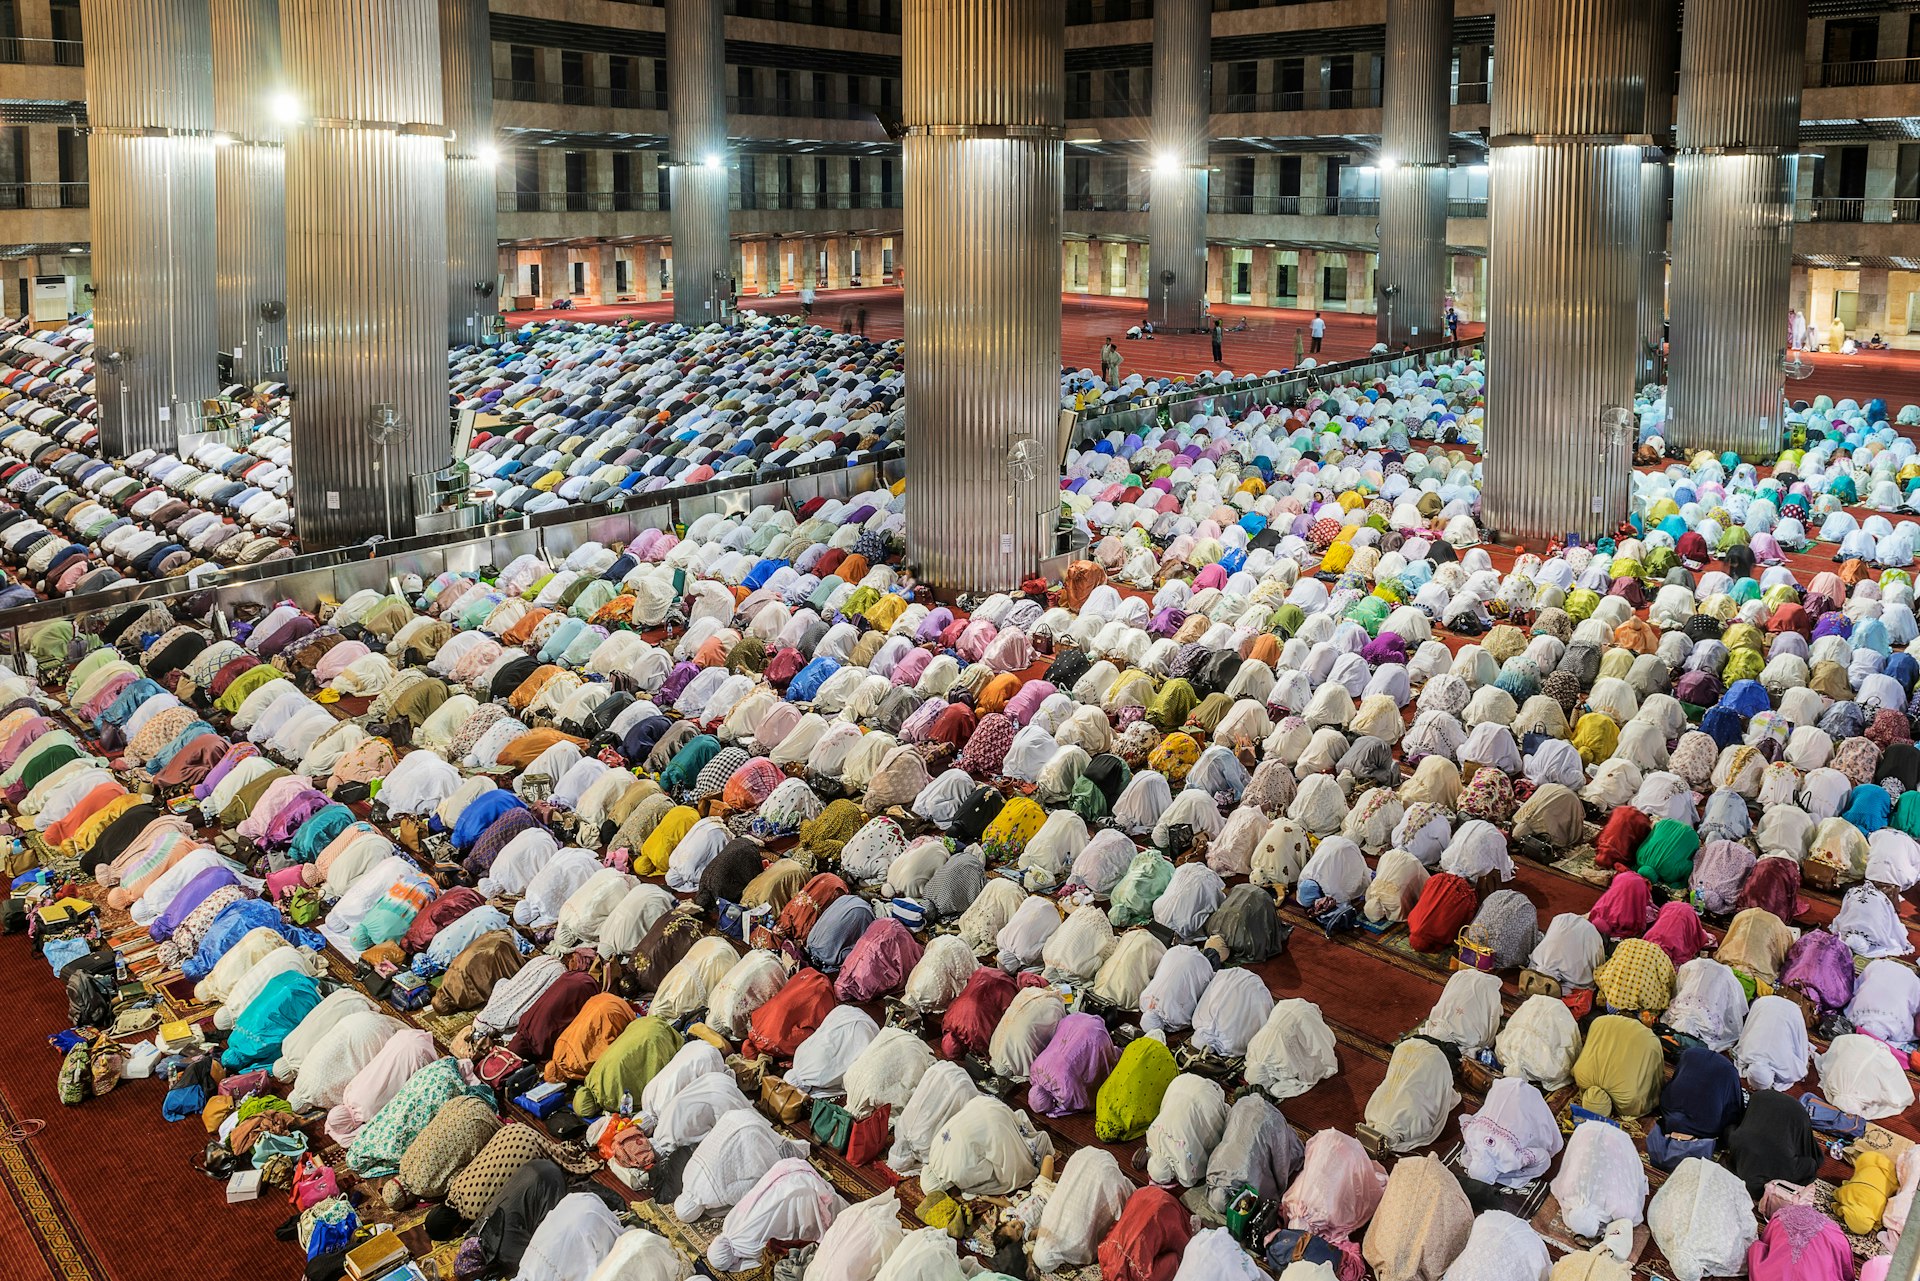 People kneeling forward in prayer during Ramadan; men on one side of the mosque, women on the other